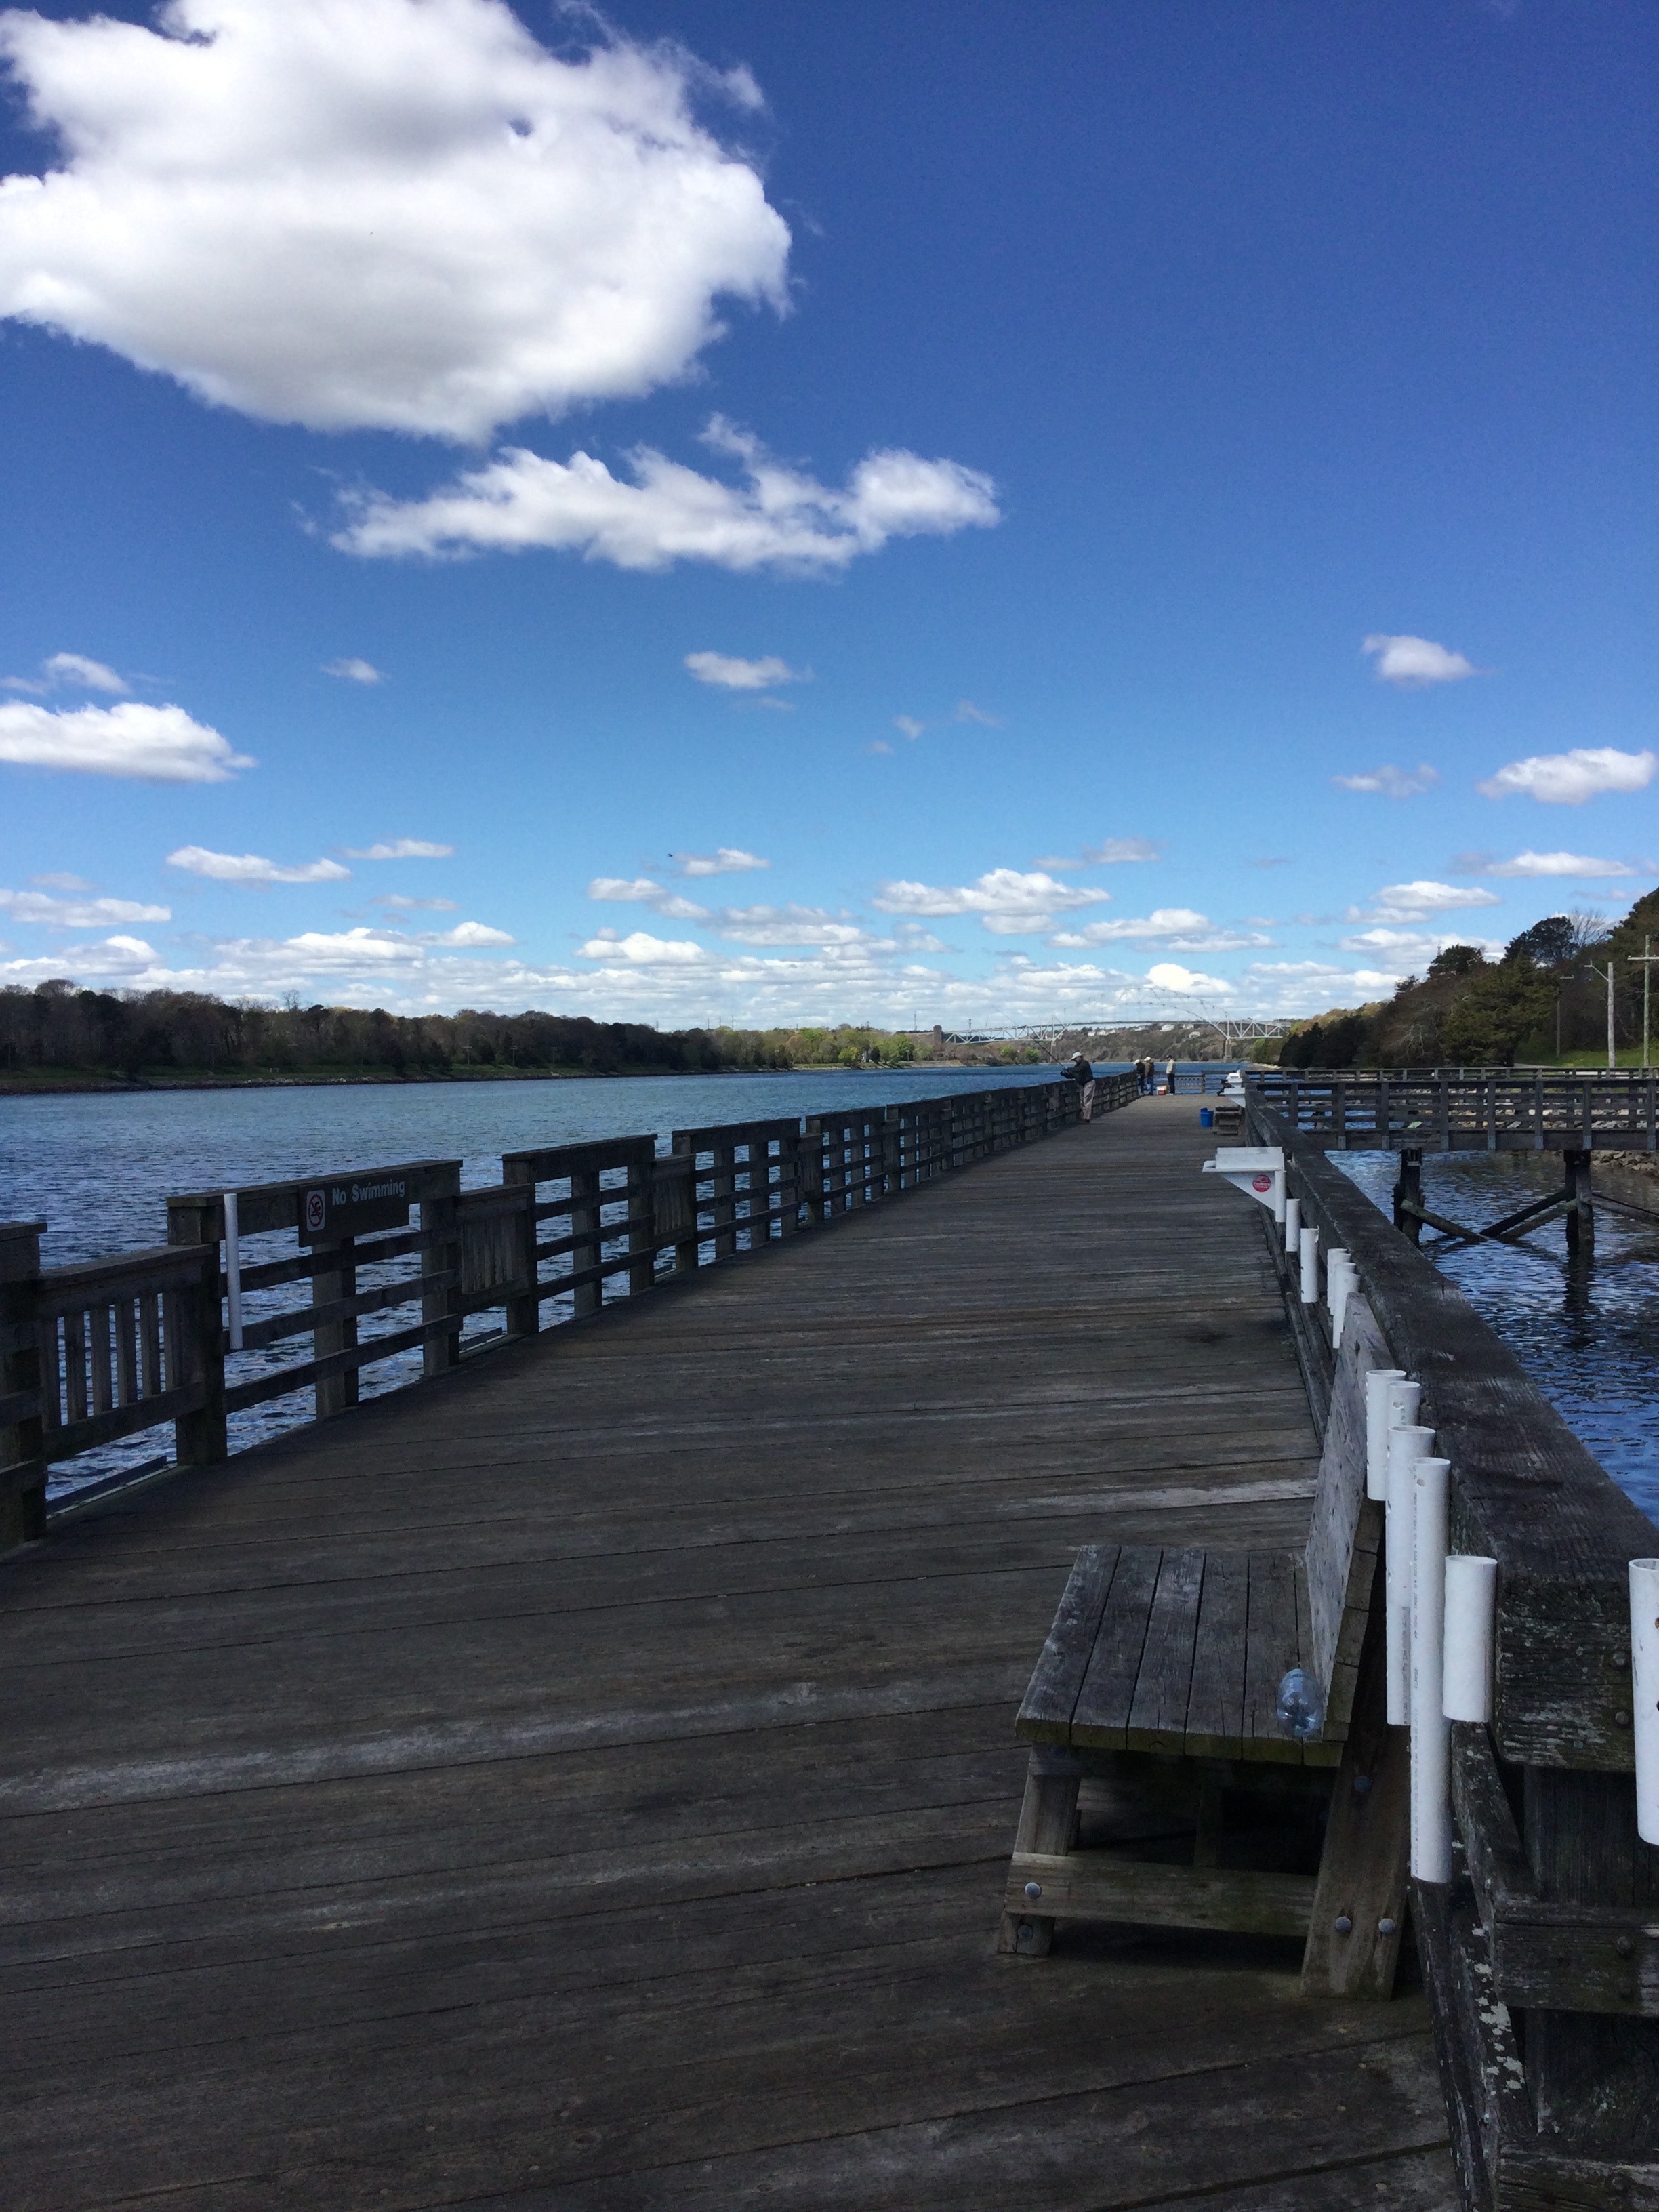 A long wooden pier with lowered areas along the railing. There are benches and rod holders.